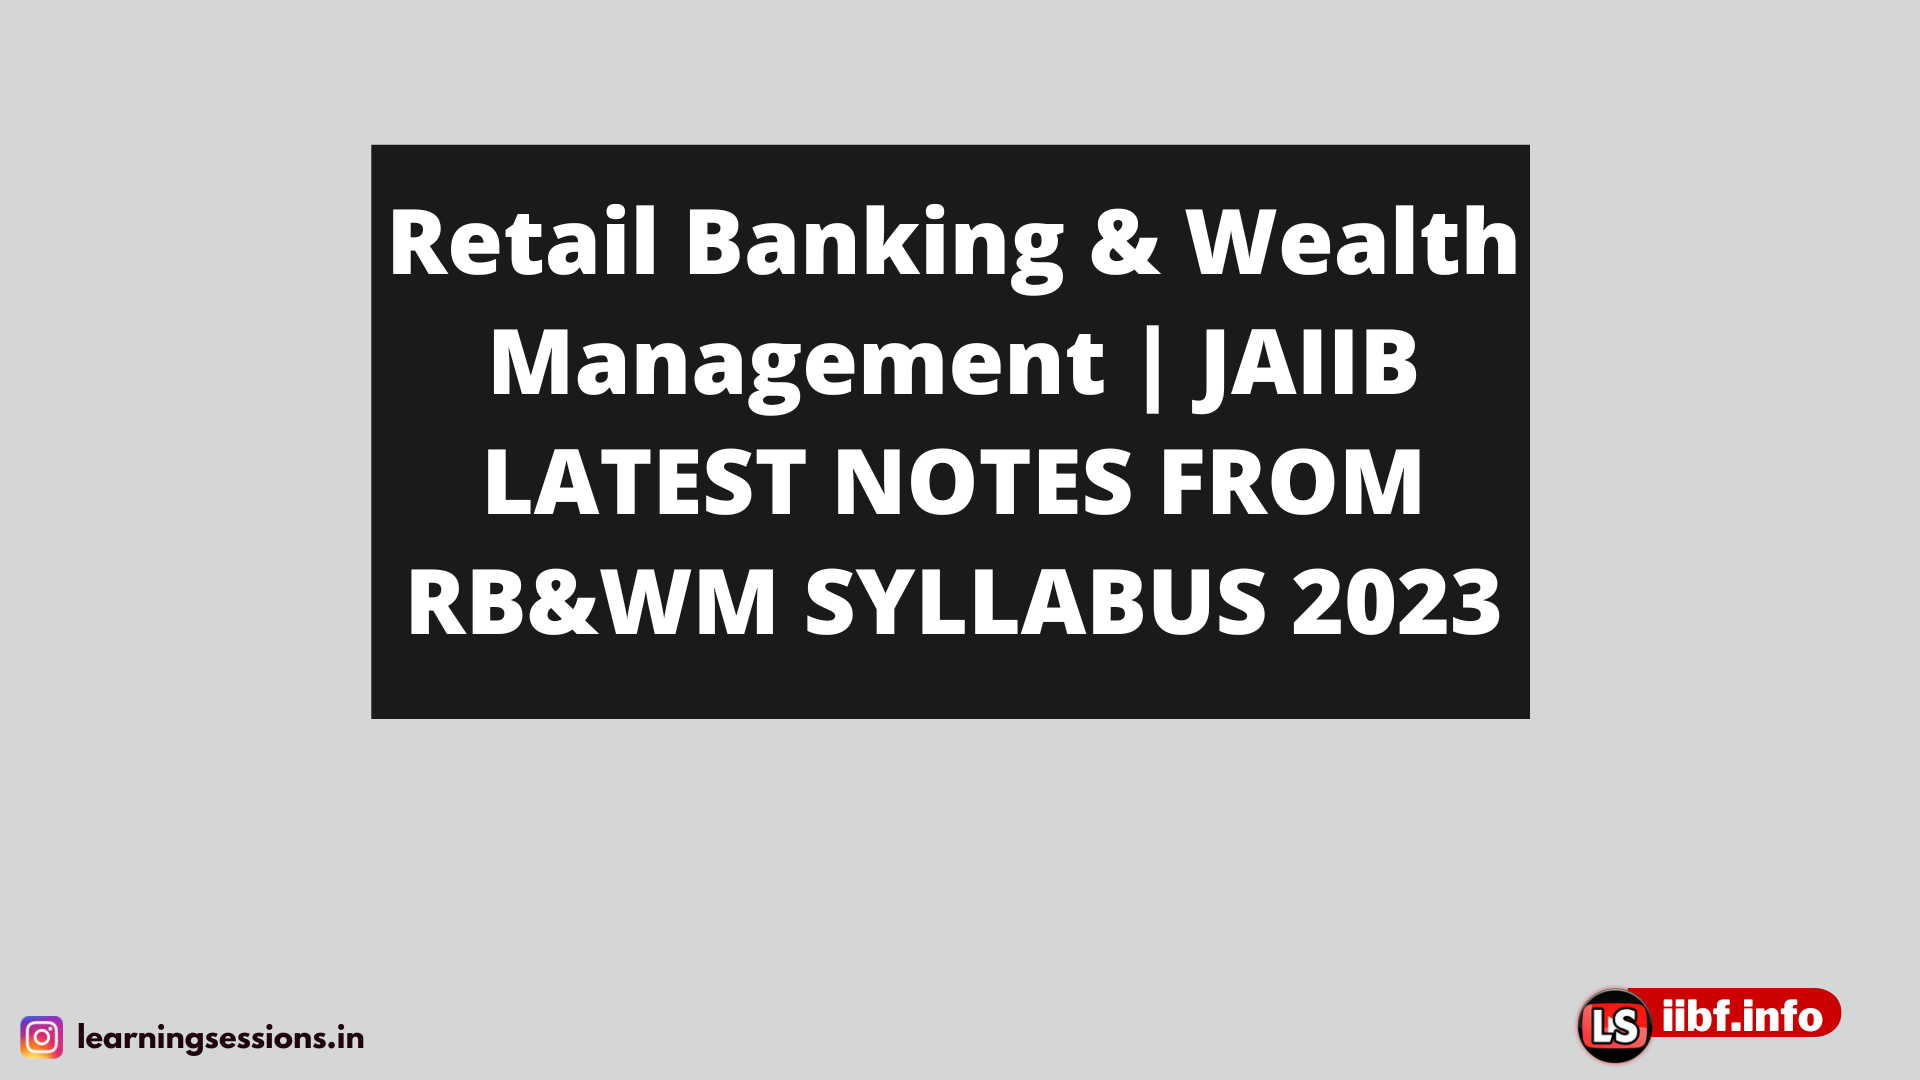 Retail Banking & Wealth Management | JAIIB LATEST NOTES FROM RB & WM SYLLABUS 2023